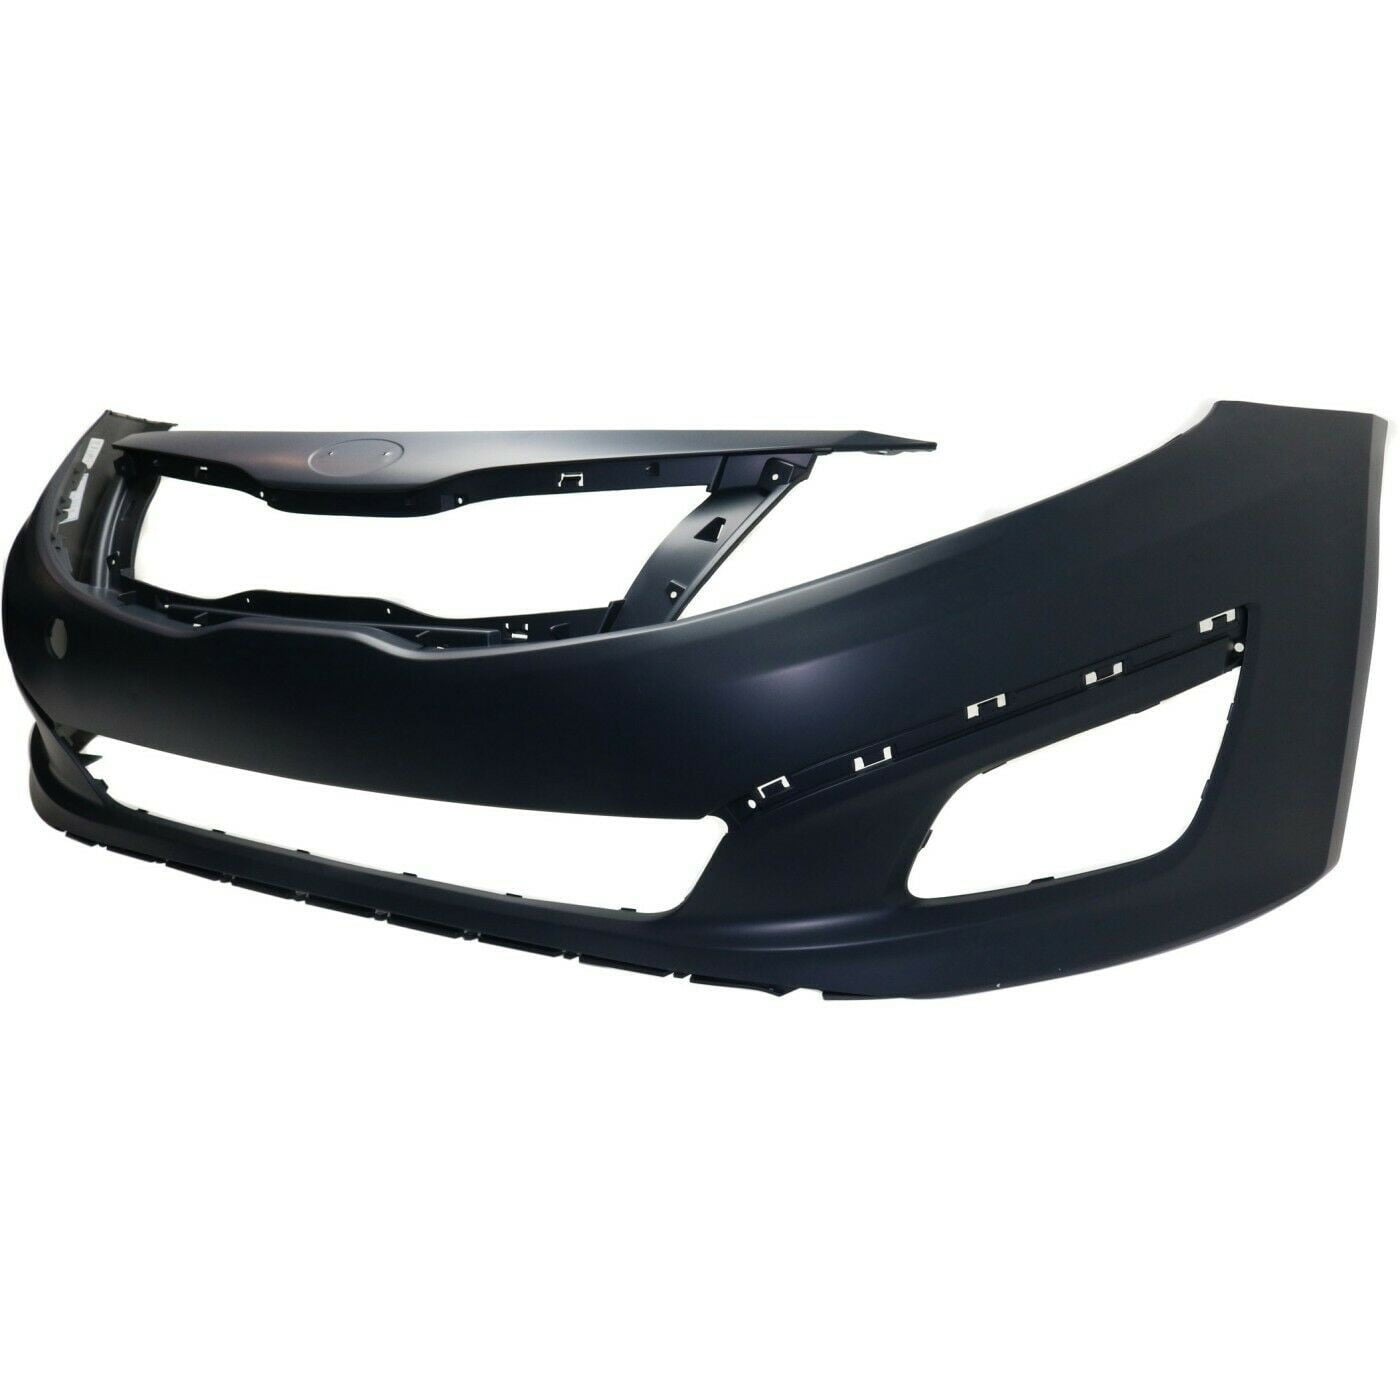 Front Plastic Bumper Cover Fascia For 2014-2015 Kia Optima EX LX SXL SX Limited Sedan 14-15 Primed and Ready for Paint KI1000169 865112T500 With Fog Light Holes New